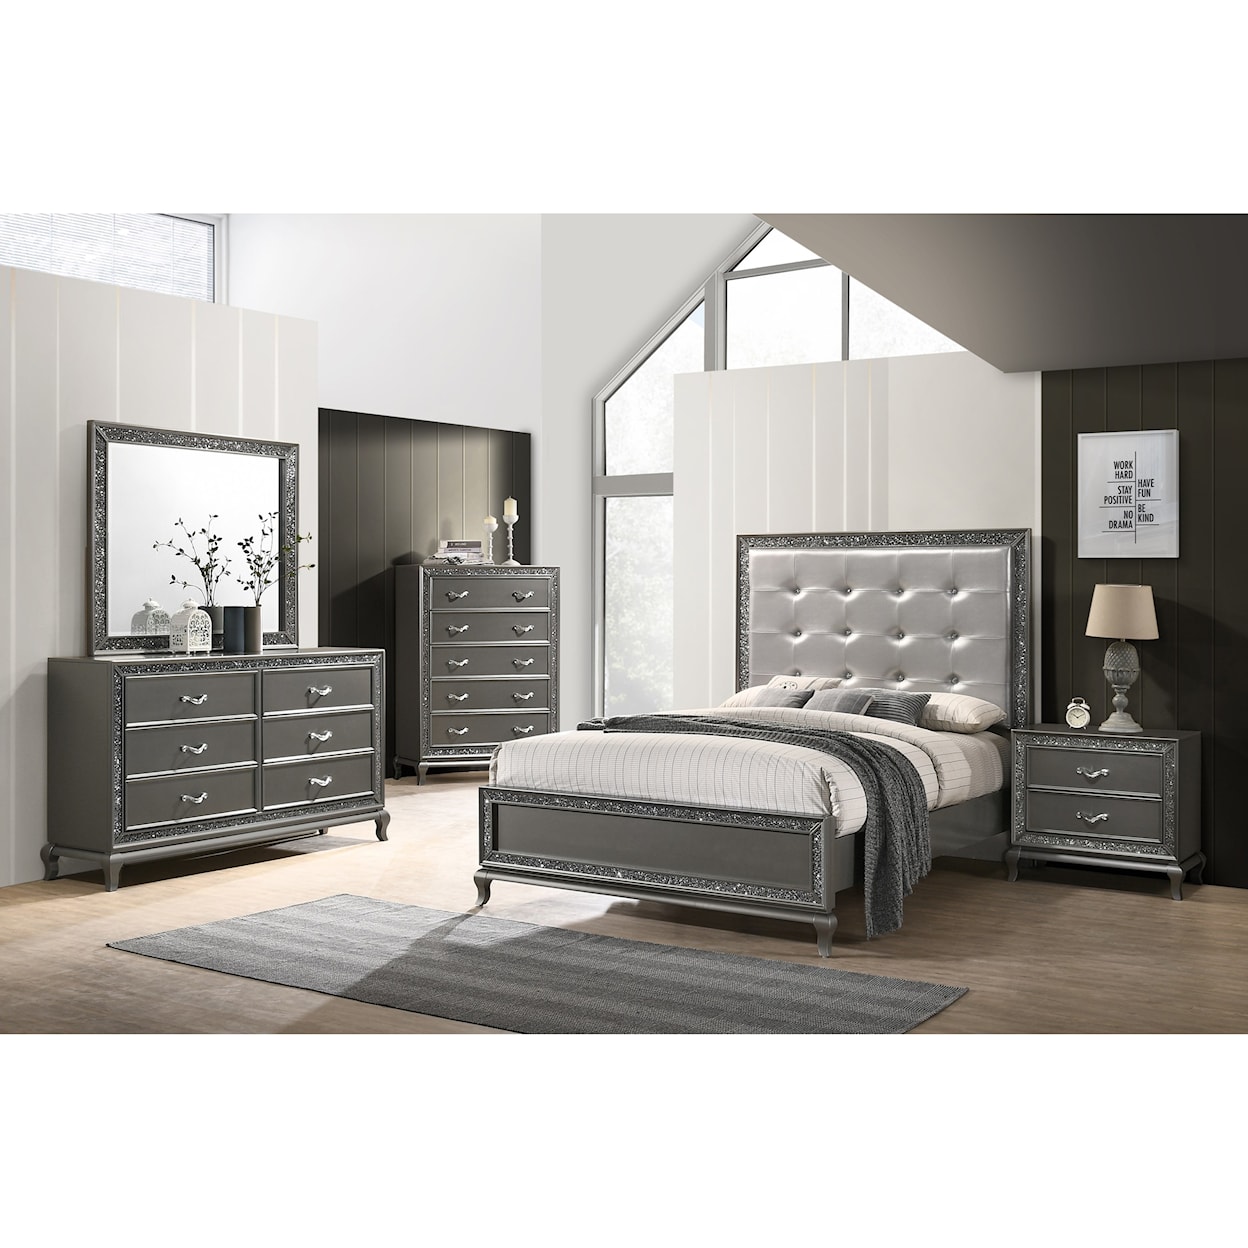 New Classic Furniture Park Imperial King Bedroom Group